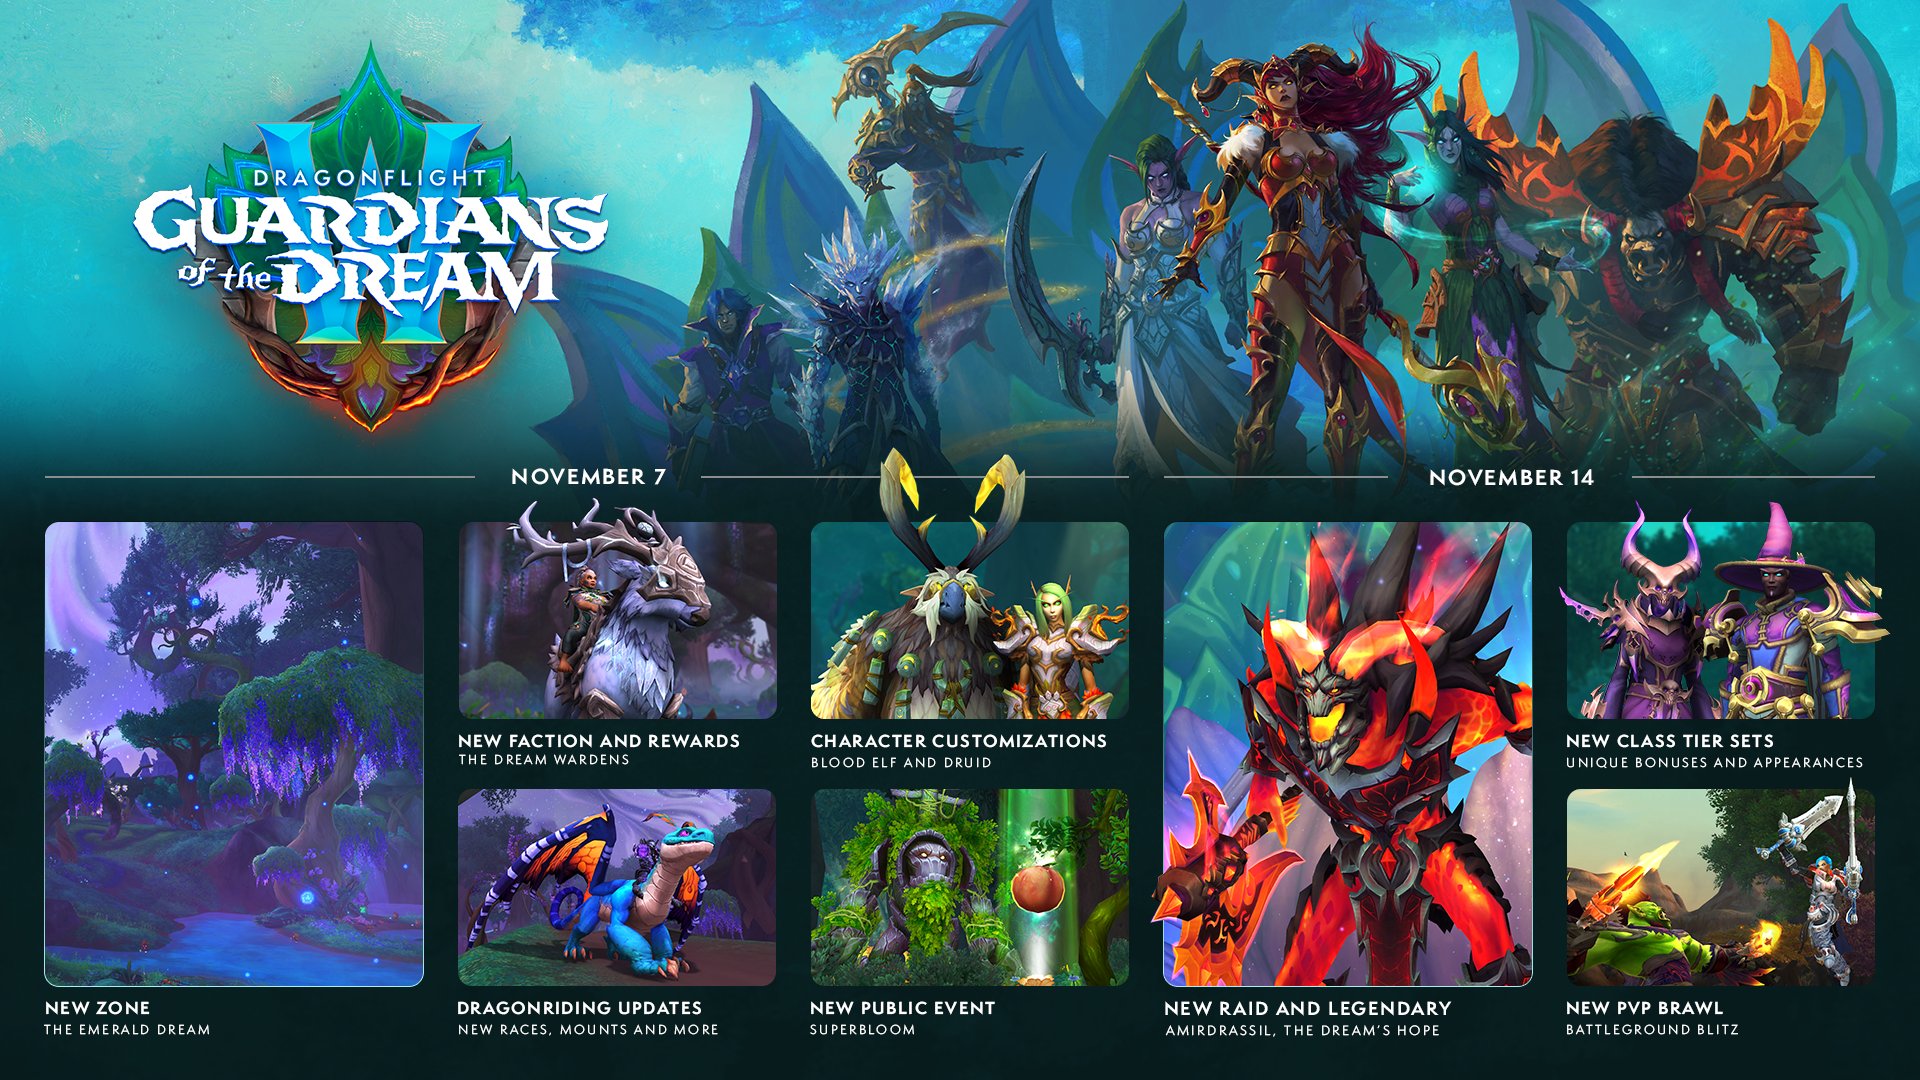 An infographic of features for the Guardians of the Dream patch for WoW Dragonflight. The upper third of the image features the Guardians of the Dream logo to the left and key art of several major characters including from left to right: Kalecgos, Vyranoth, Nozdormu, Tyrande, Alexstrasza, Merithra, and Ebyssian. The lower two thirds of the image features a grid of images, each representing upcoming features. The grid is divided into two sections labeled “November 7” and “November 14”. The images are labeled as follows:

November 7
New Zone – The Emerald Dream
New Faction and Rewards – The Dream Wardens
Dragonriding Updates – New Races, Mounts and More
Character Customizations – Blood Elf and Druid
New Public Event – Superbloom

November 14
New Raid and Legendary – Amirdrassil, The Dream’s Hope
New Class Tier Sets – Unique Bonuses and Appearances
New PvP Brawl – Battleground Blitz